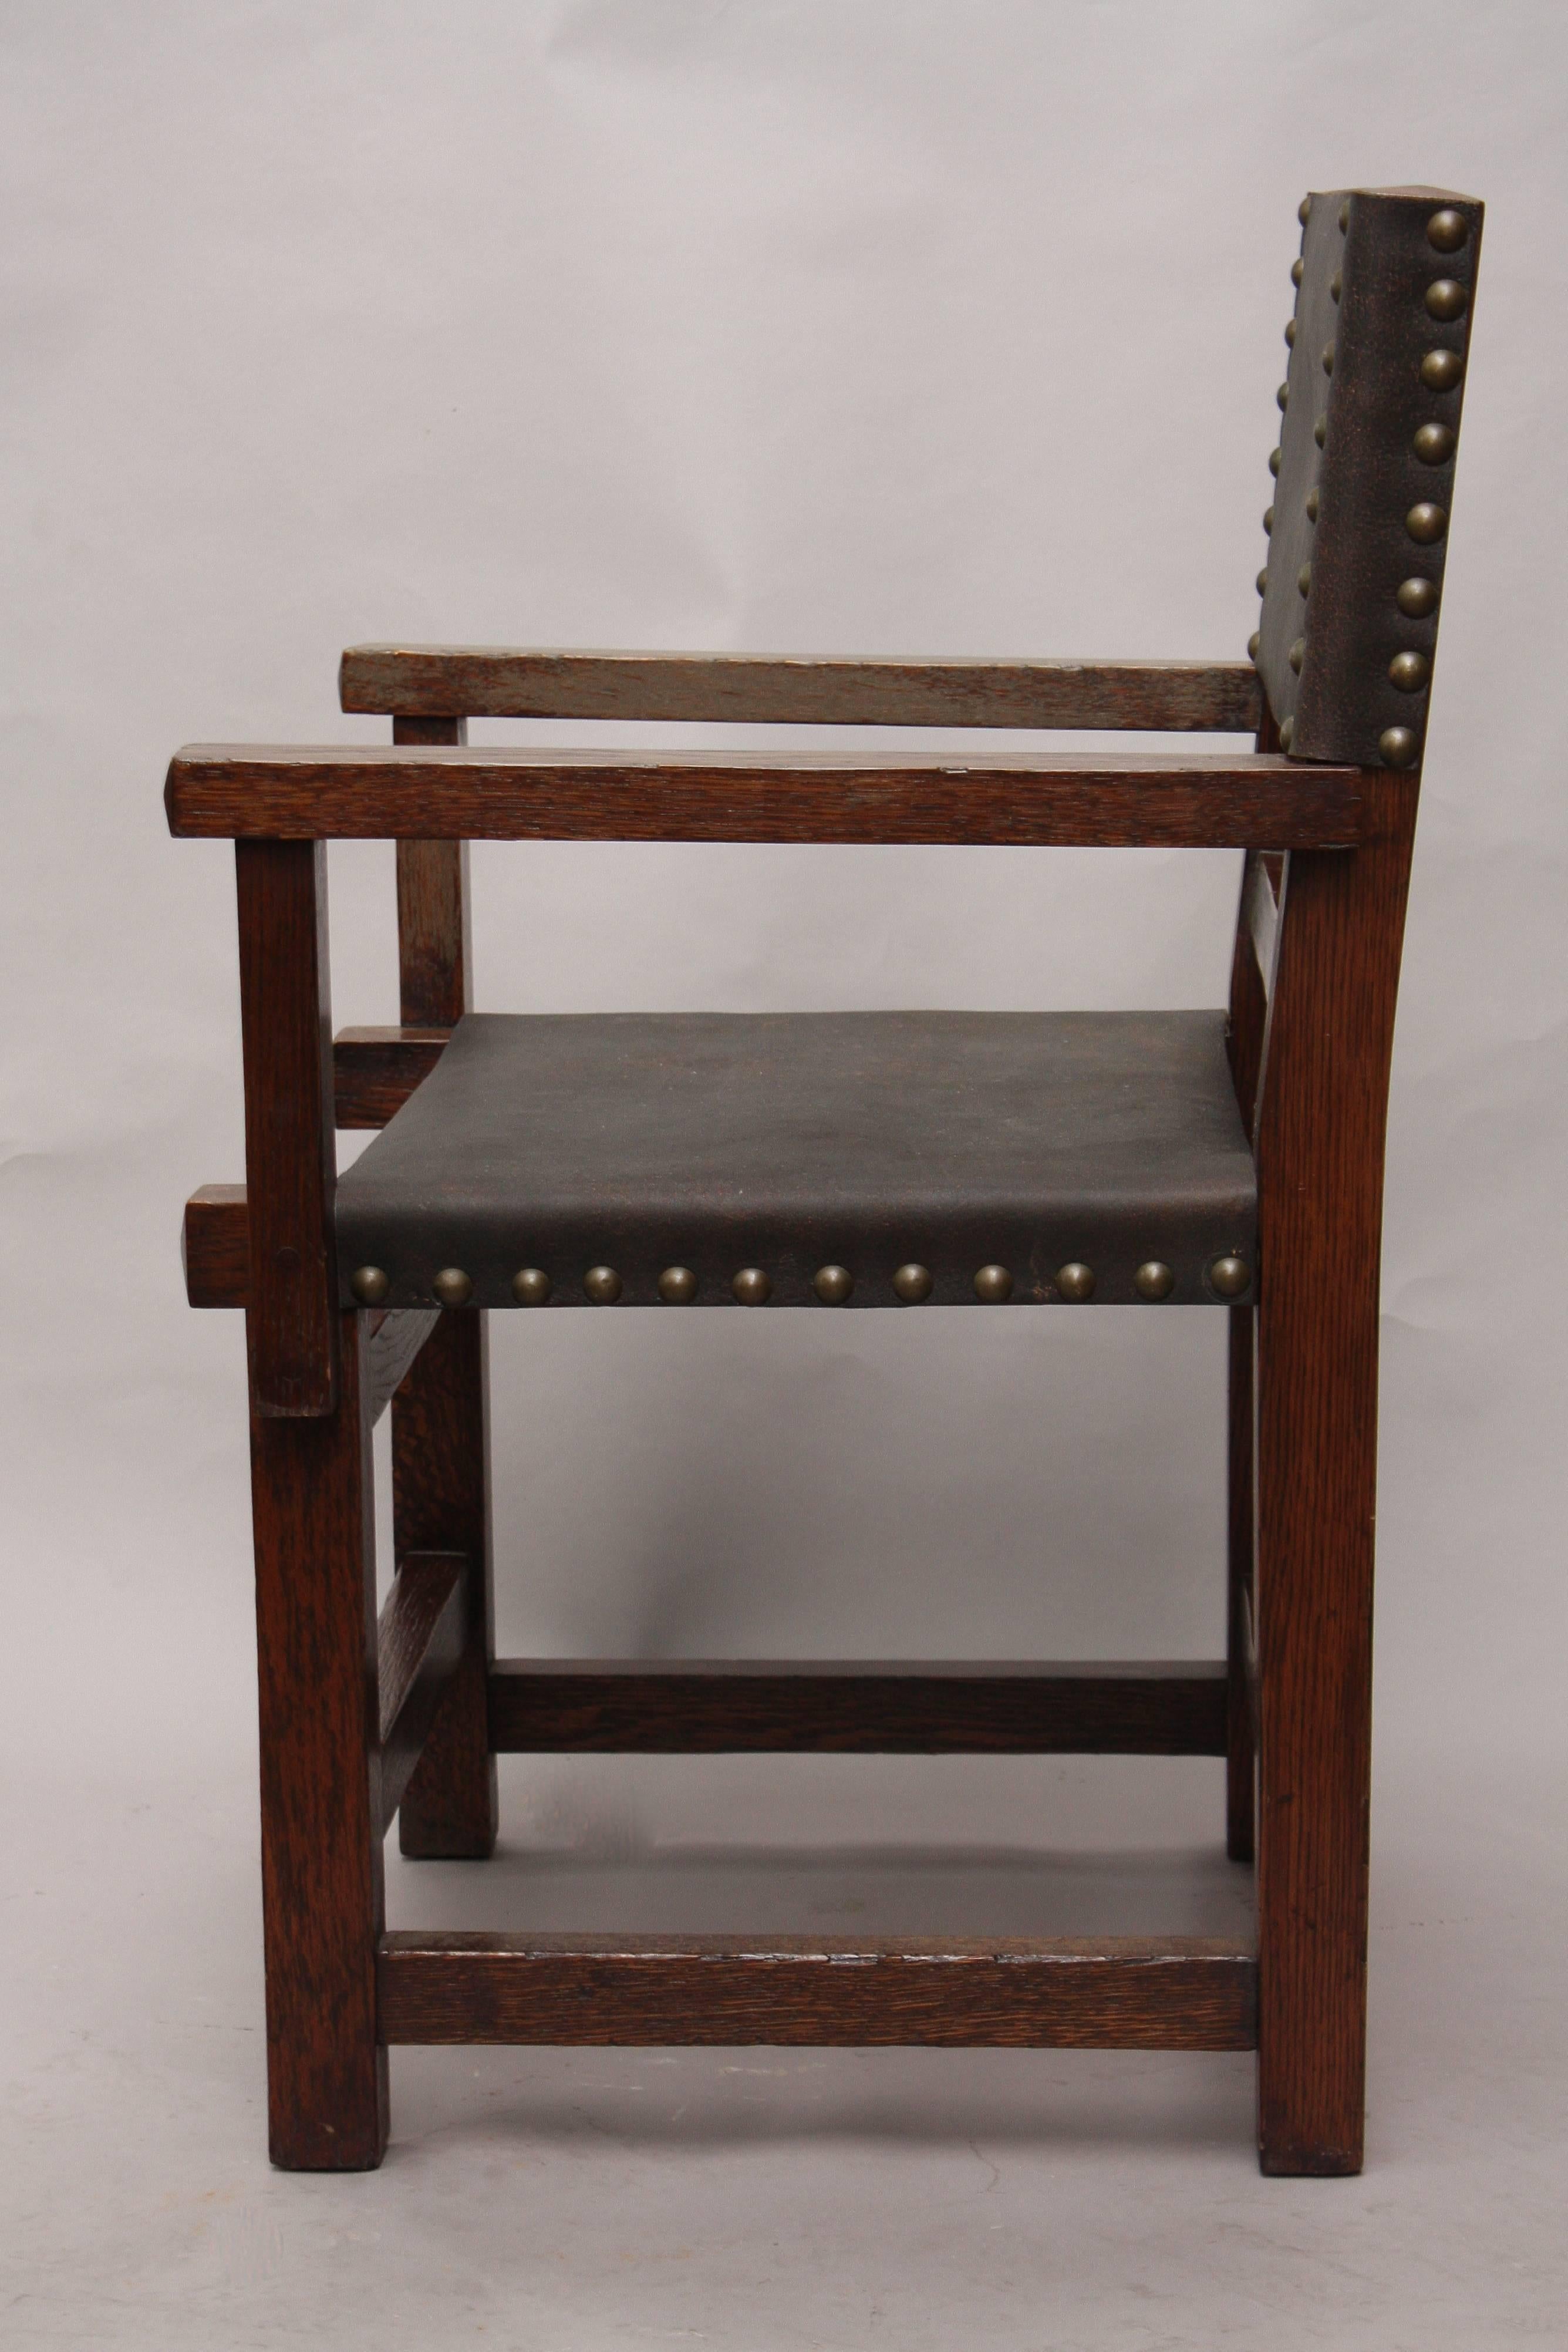 Arts & Crafts period oak chair with new leather upholstery.